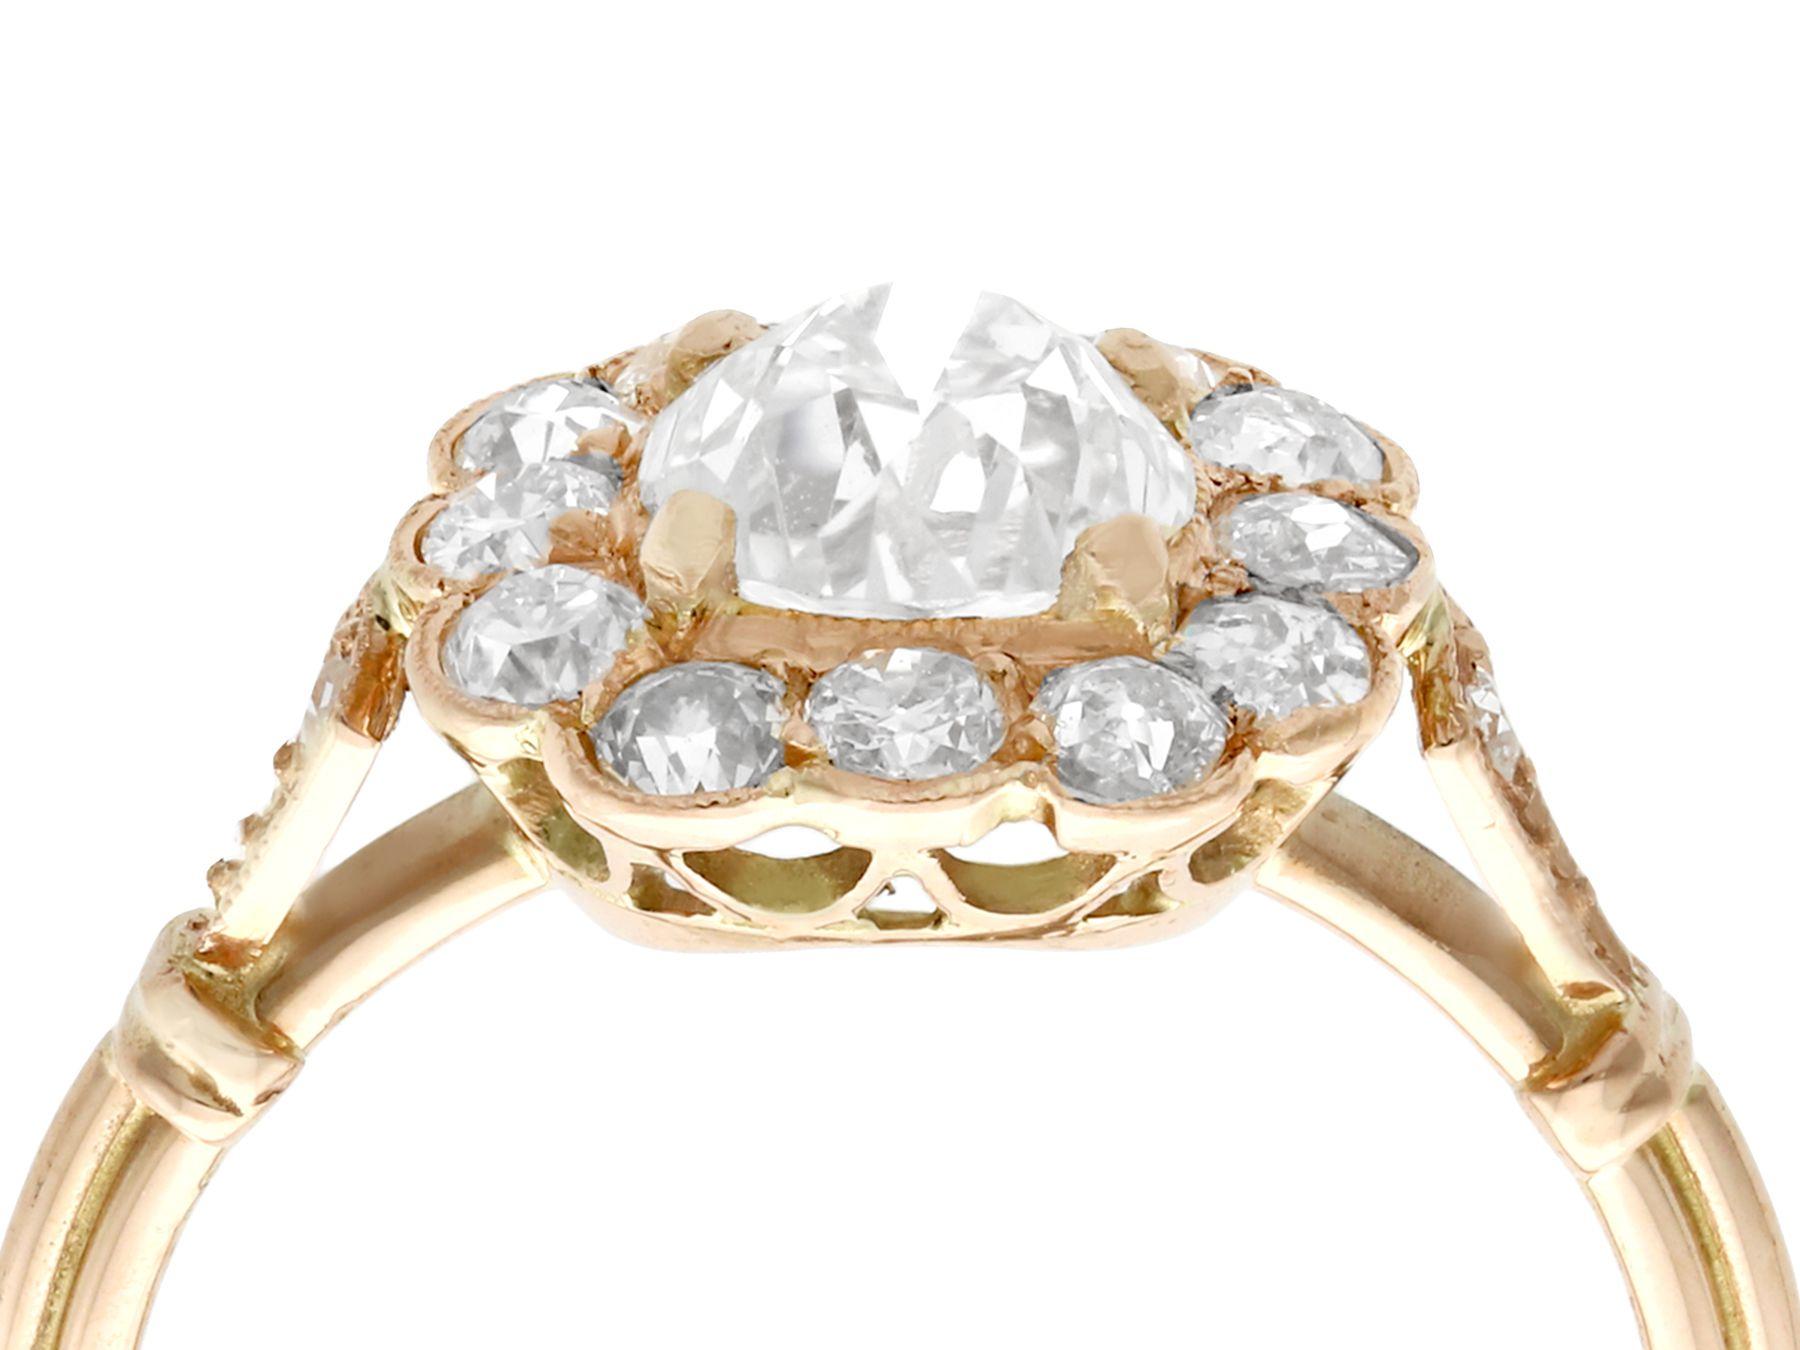 A stunning antique 1.69 carat diamond and contemporary 18k rose gold cluster ring; part of our diverse diamond estate jewelry collections.

This stunning, fine and impressive diamond cluster ring has been crafted in 18k rose gold.

The contemporary